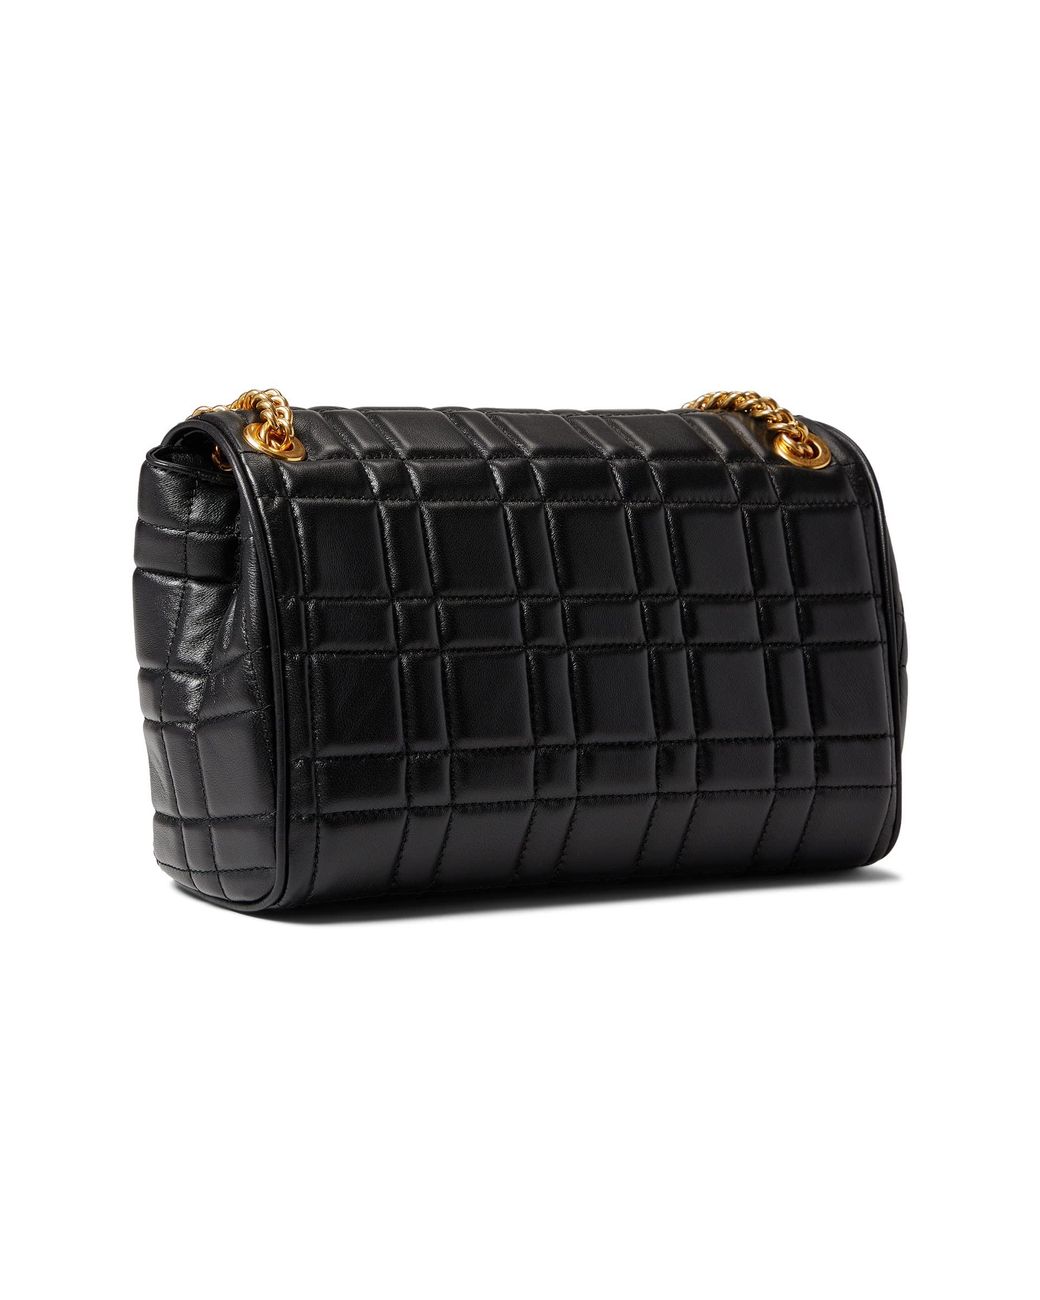 Kate Spade Evelyn Quilted Leather Medium Convertible Shoulder Bag in Black  | Lyst